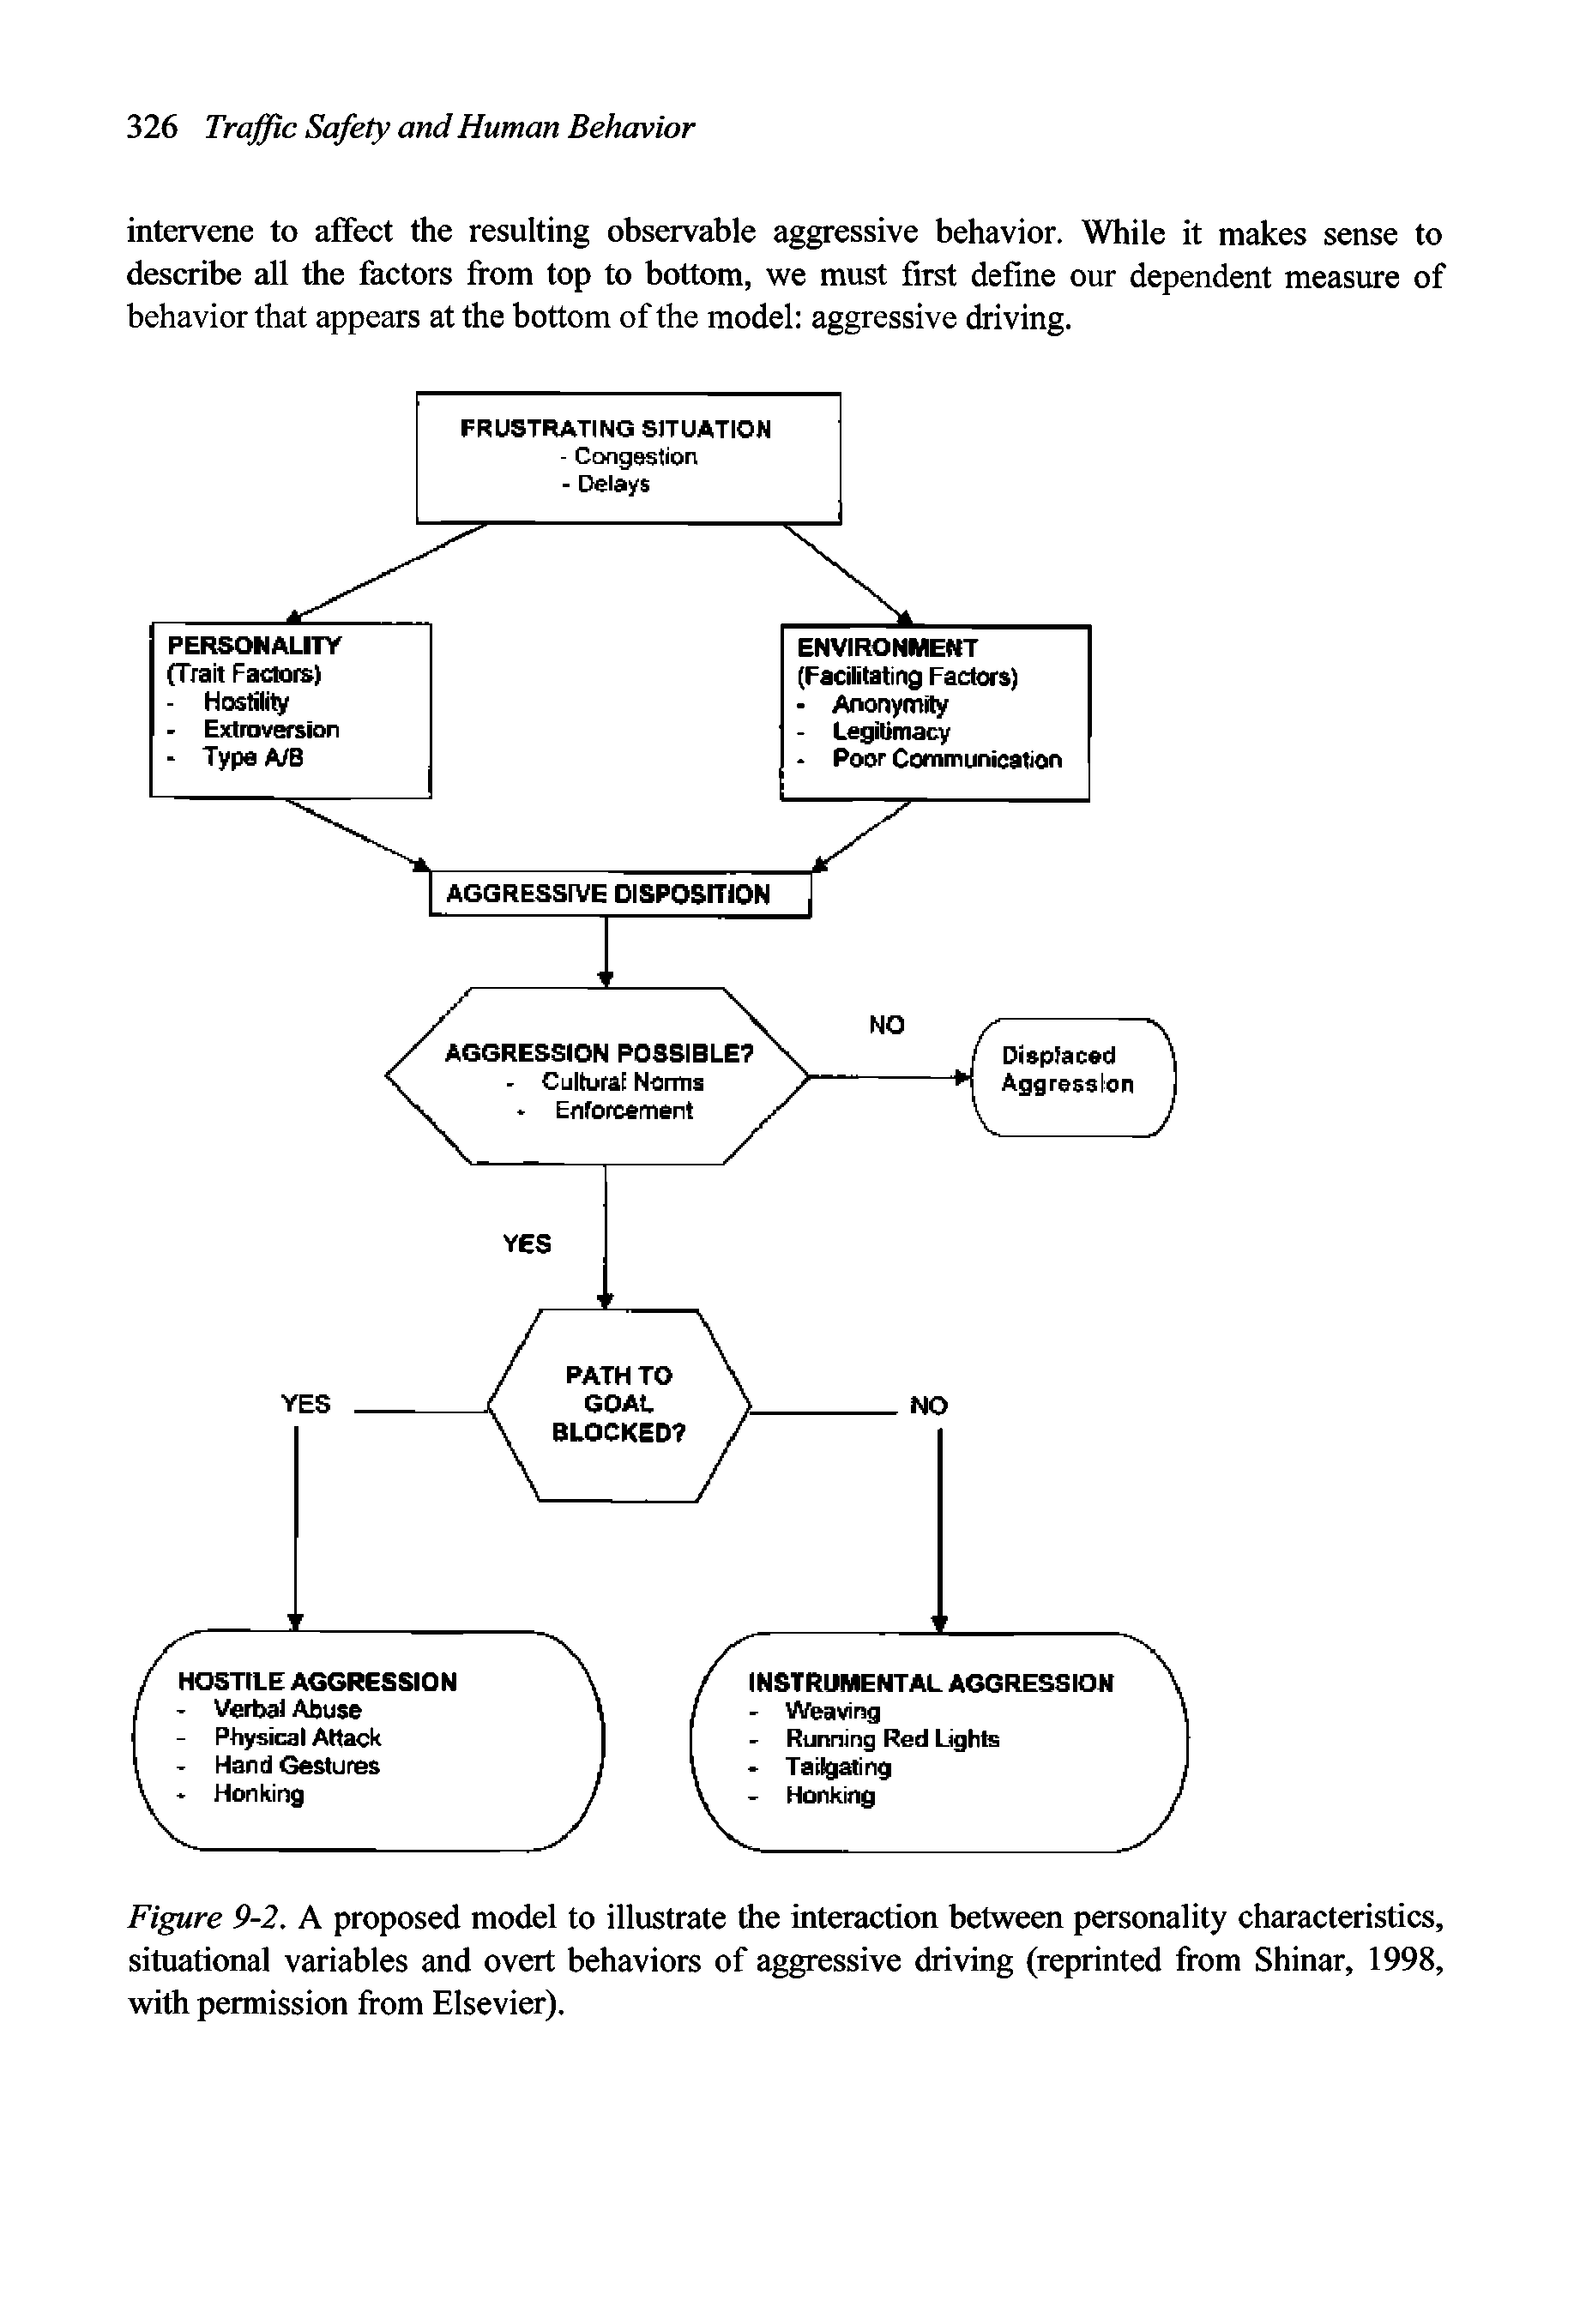 Figure 9-2. A proposed model to illustrate the interaction between personality characteristics, situational variables and overt behaviors of aggressive driving (reprinted from Shinar, 1998, with permission from Elsevier).